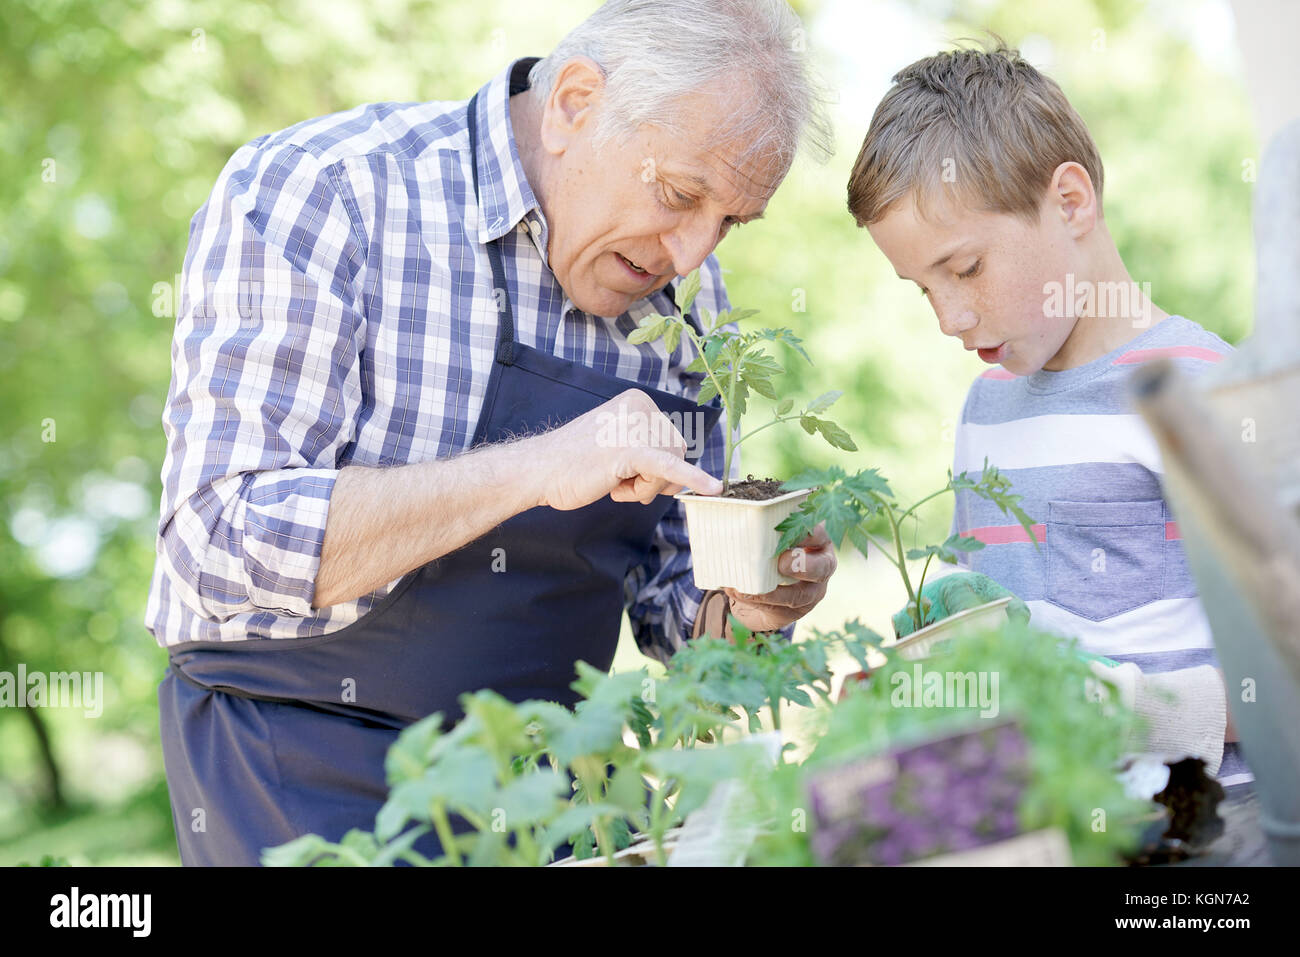 Grandfather with grandson gardening together Stock Photo